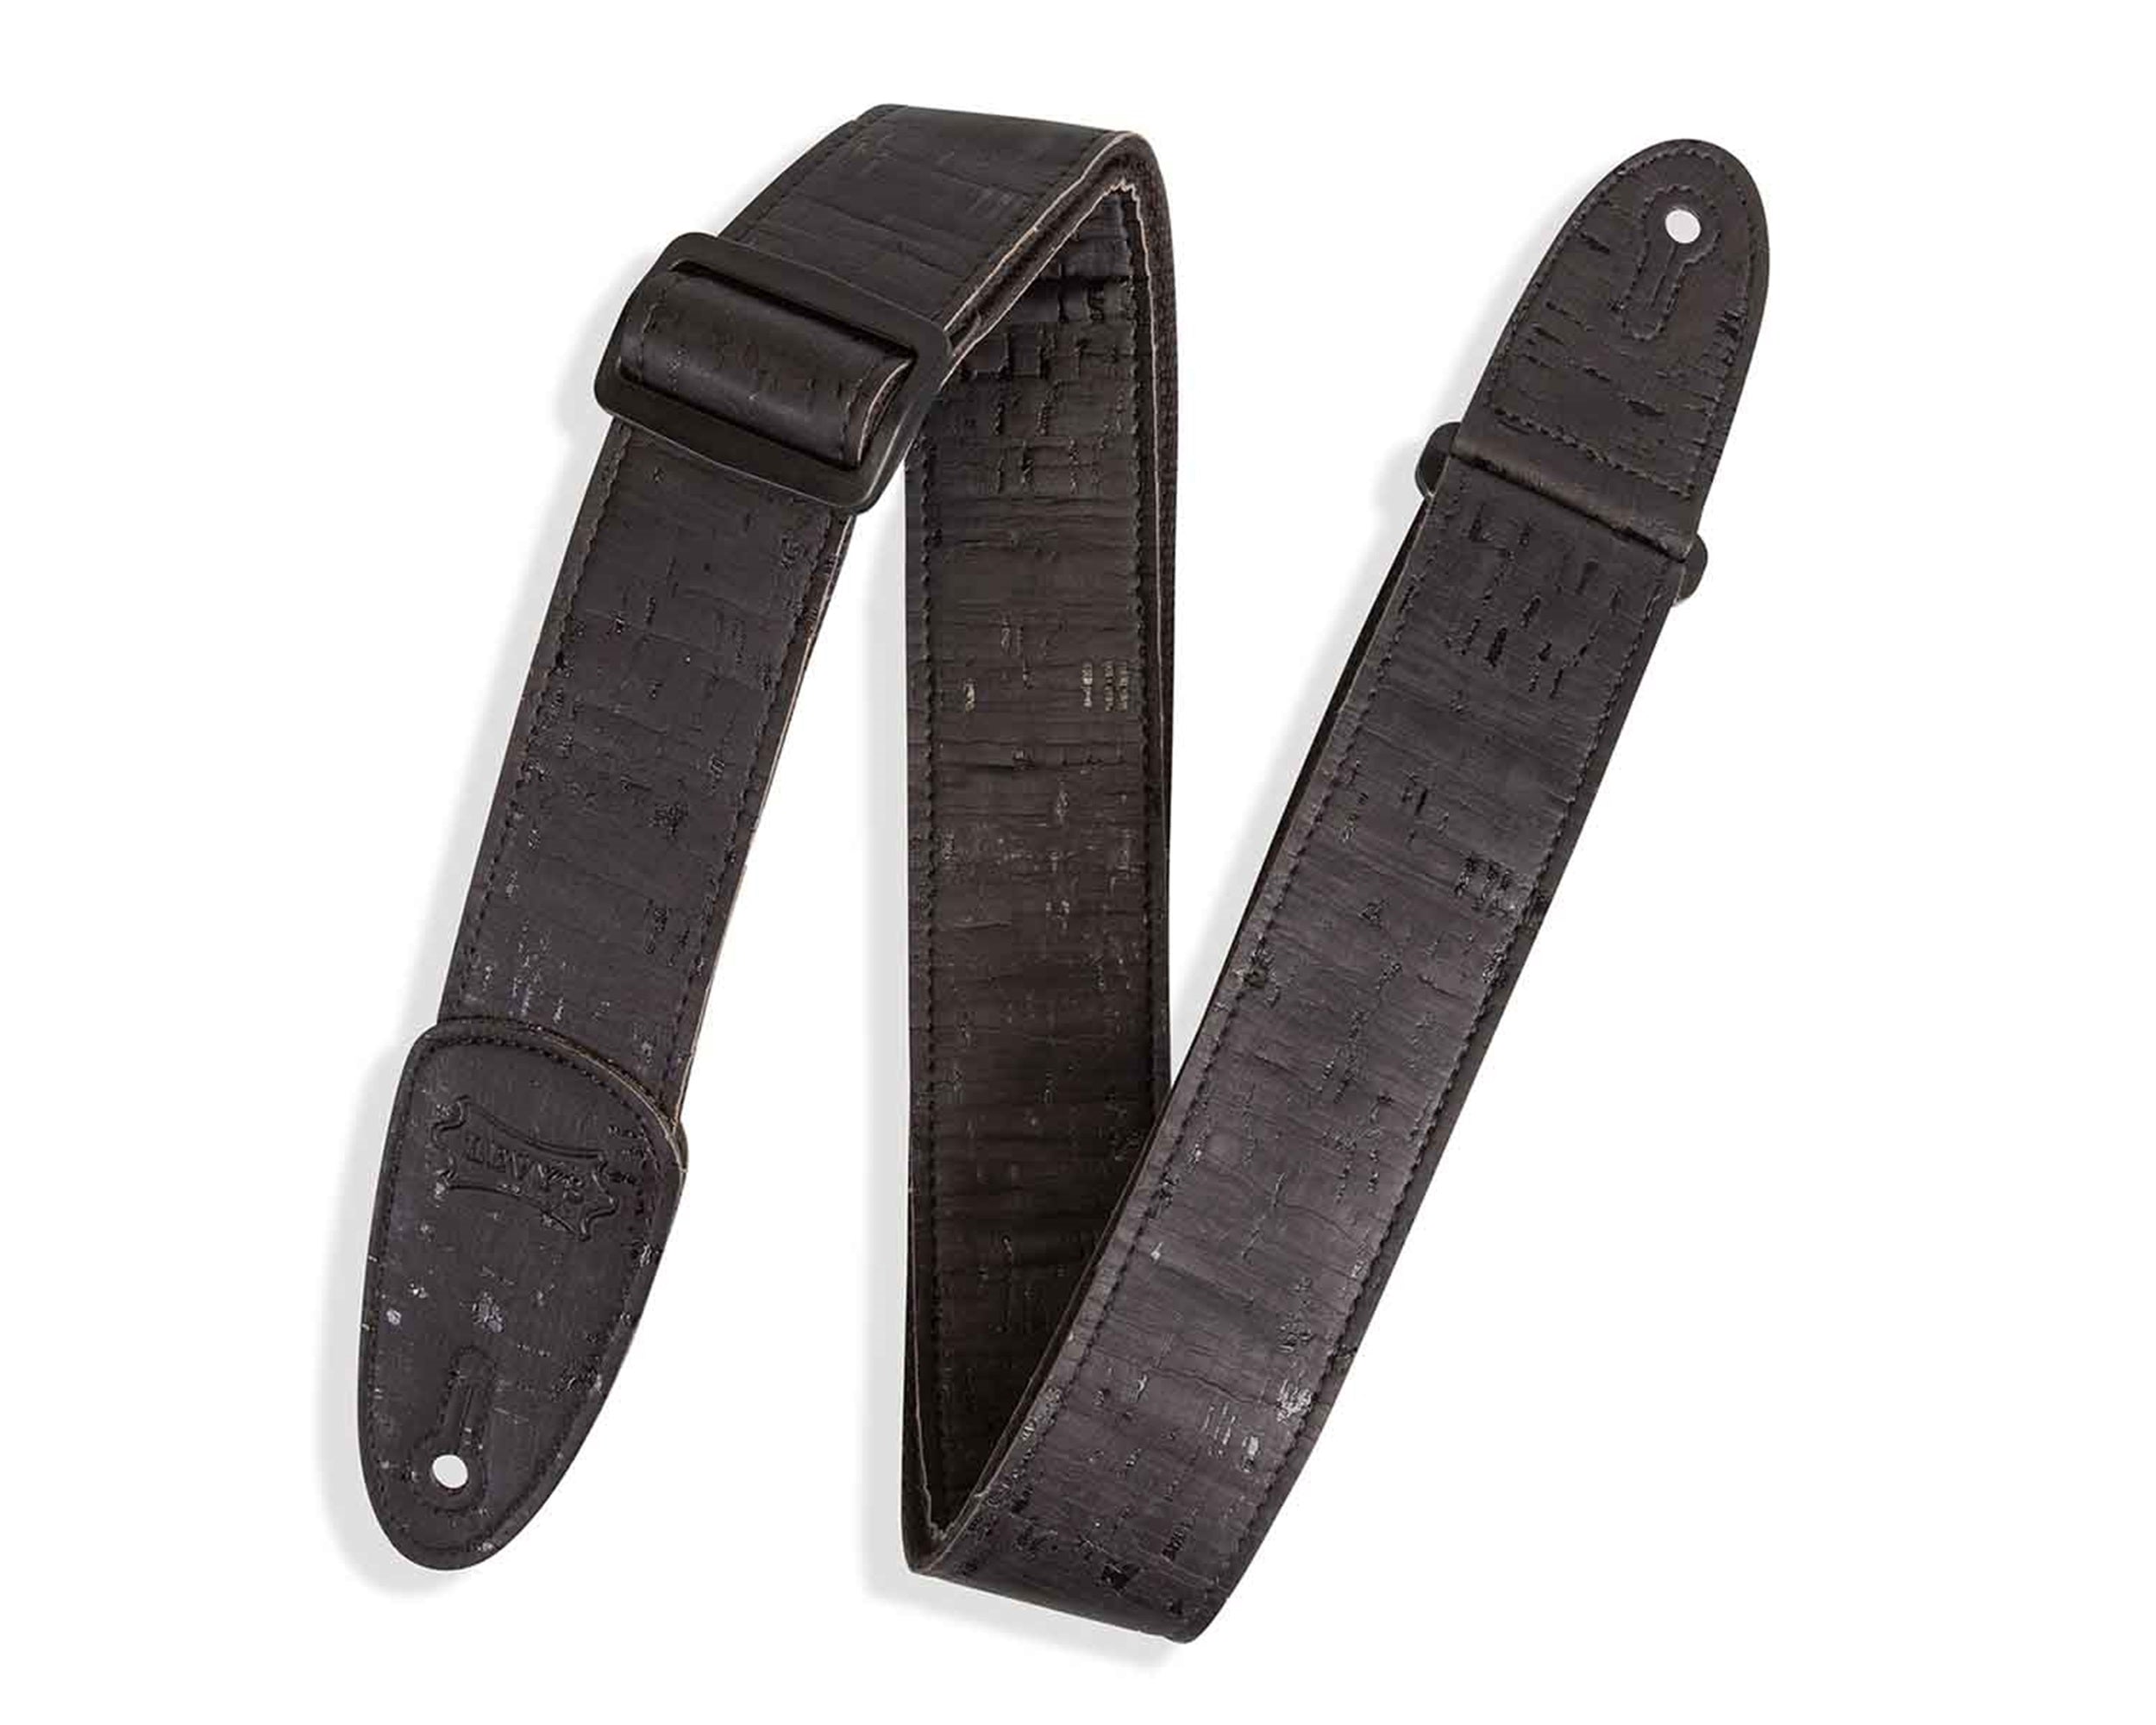 Levy's Leathers MX8-BLK 2-inch Cork Guitar Strap in Black on Black Cotton Webbing - Hollywood DJ